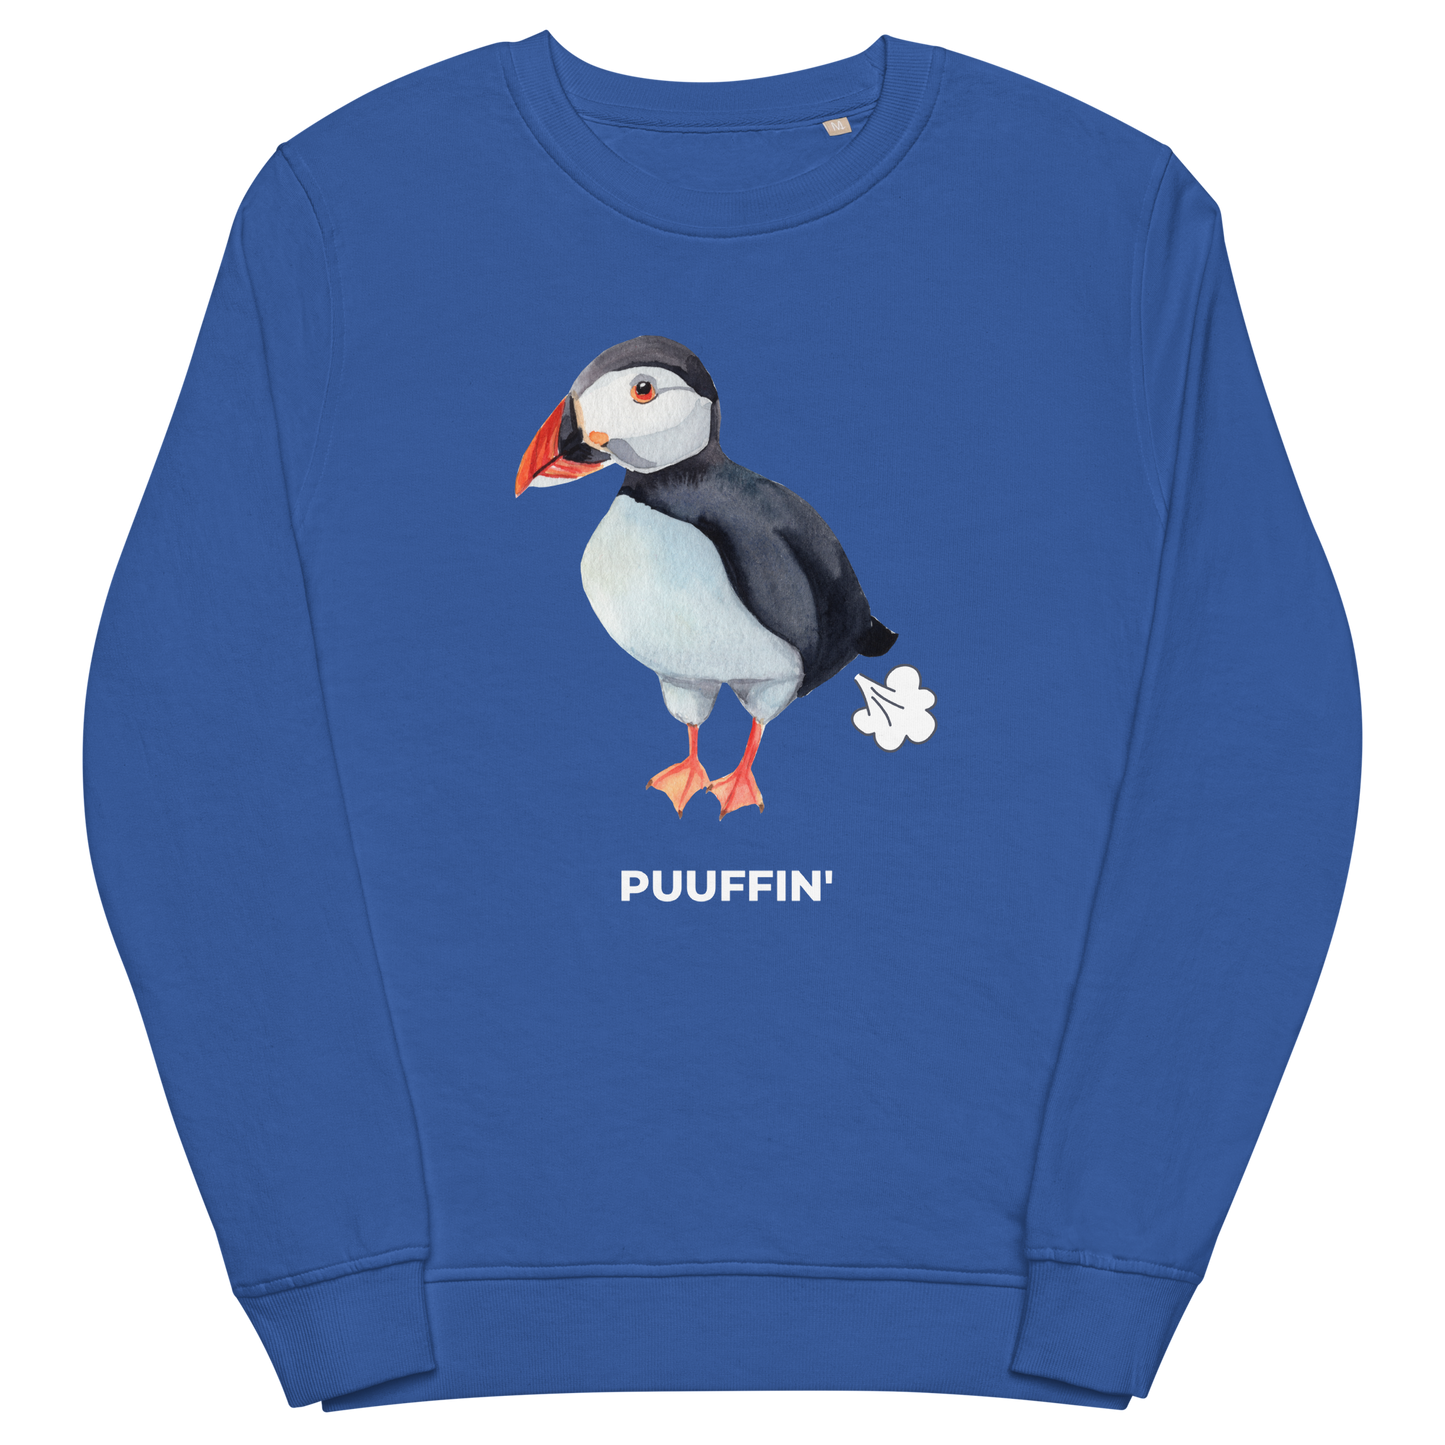 Royal Blue Organic Cotton Puffin Sweatshirt featuring a comic Puuffin' graphic on the chest - Funny Graphic Puffin Sweatshirts - Boozy Fox